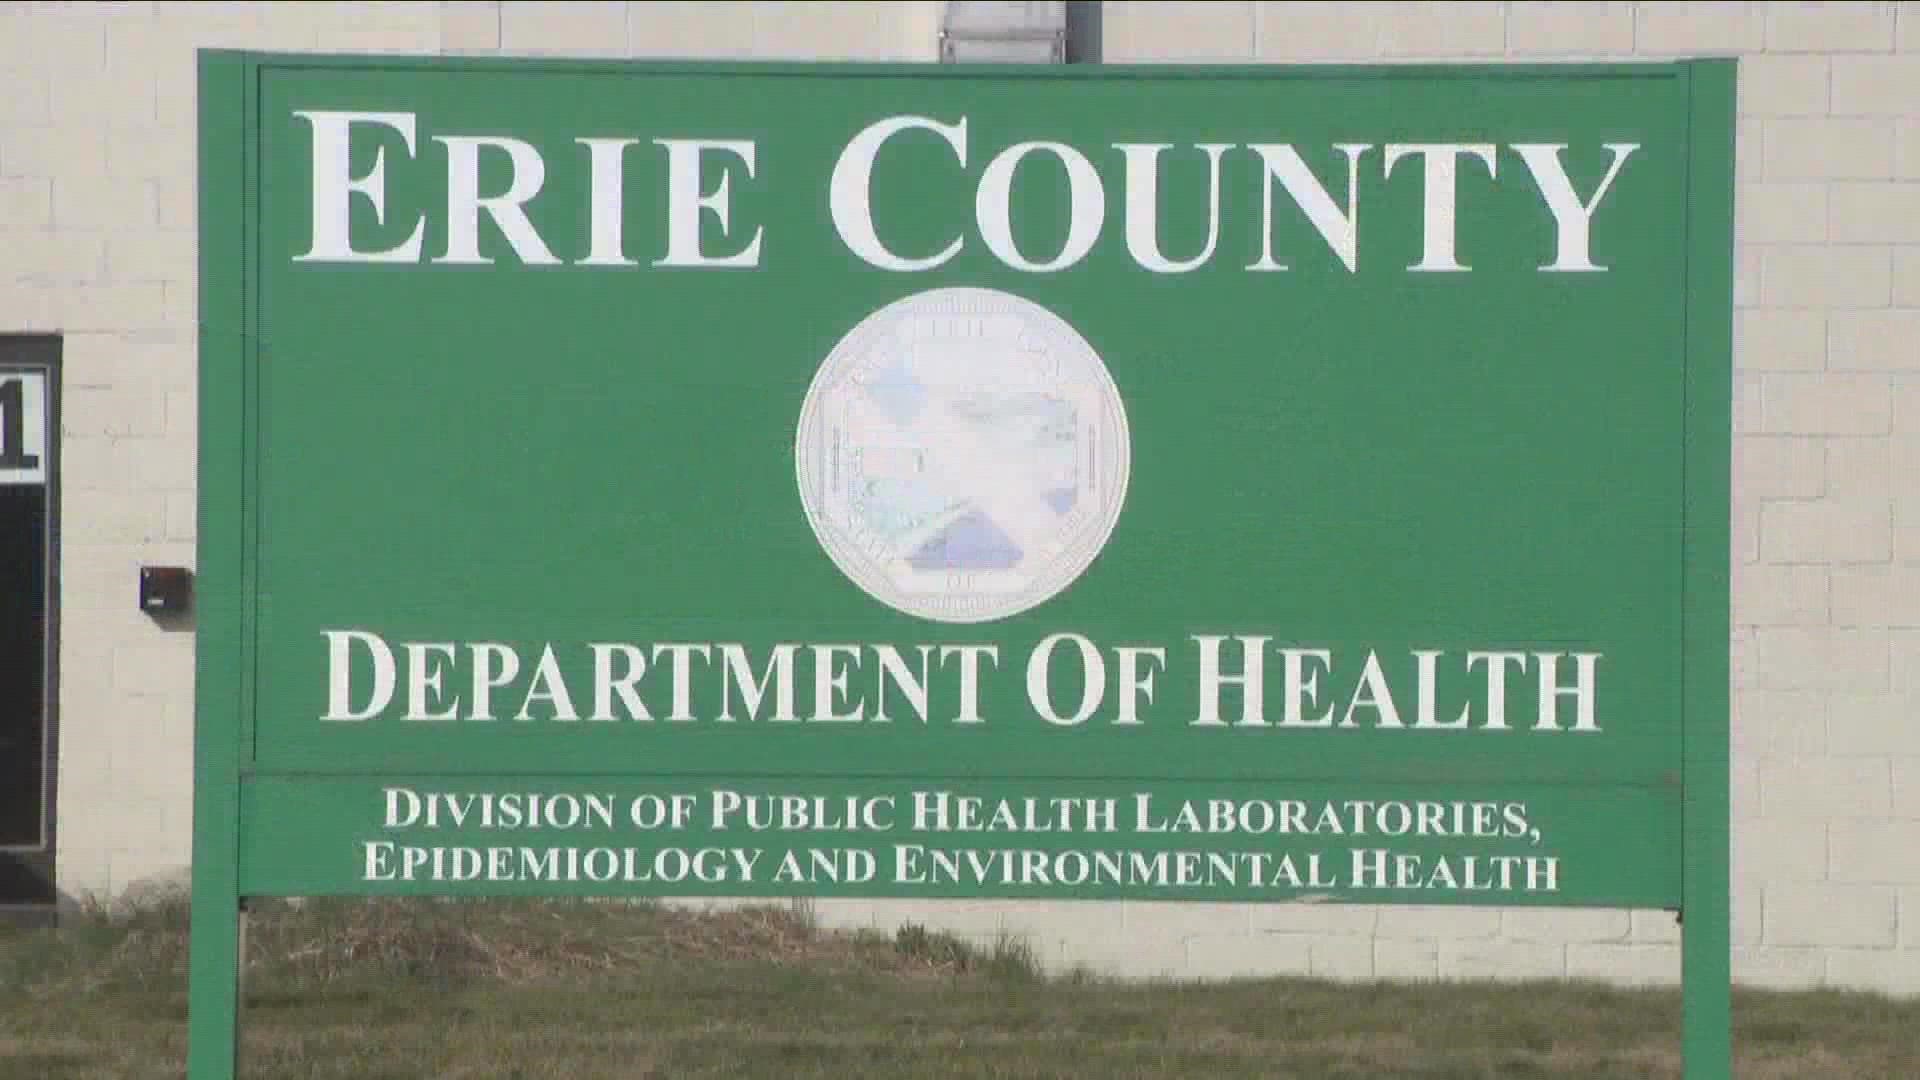 Perhaps  more concerning, the invoices were approved by the county health department, without any documentation the work had been done .